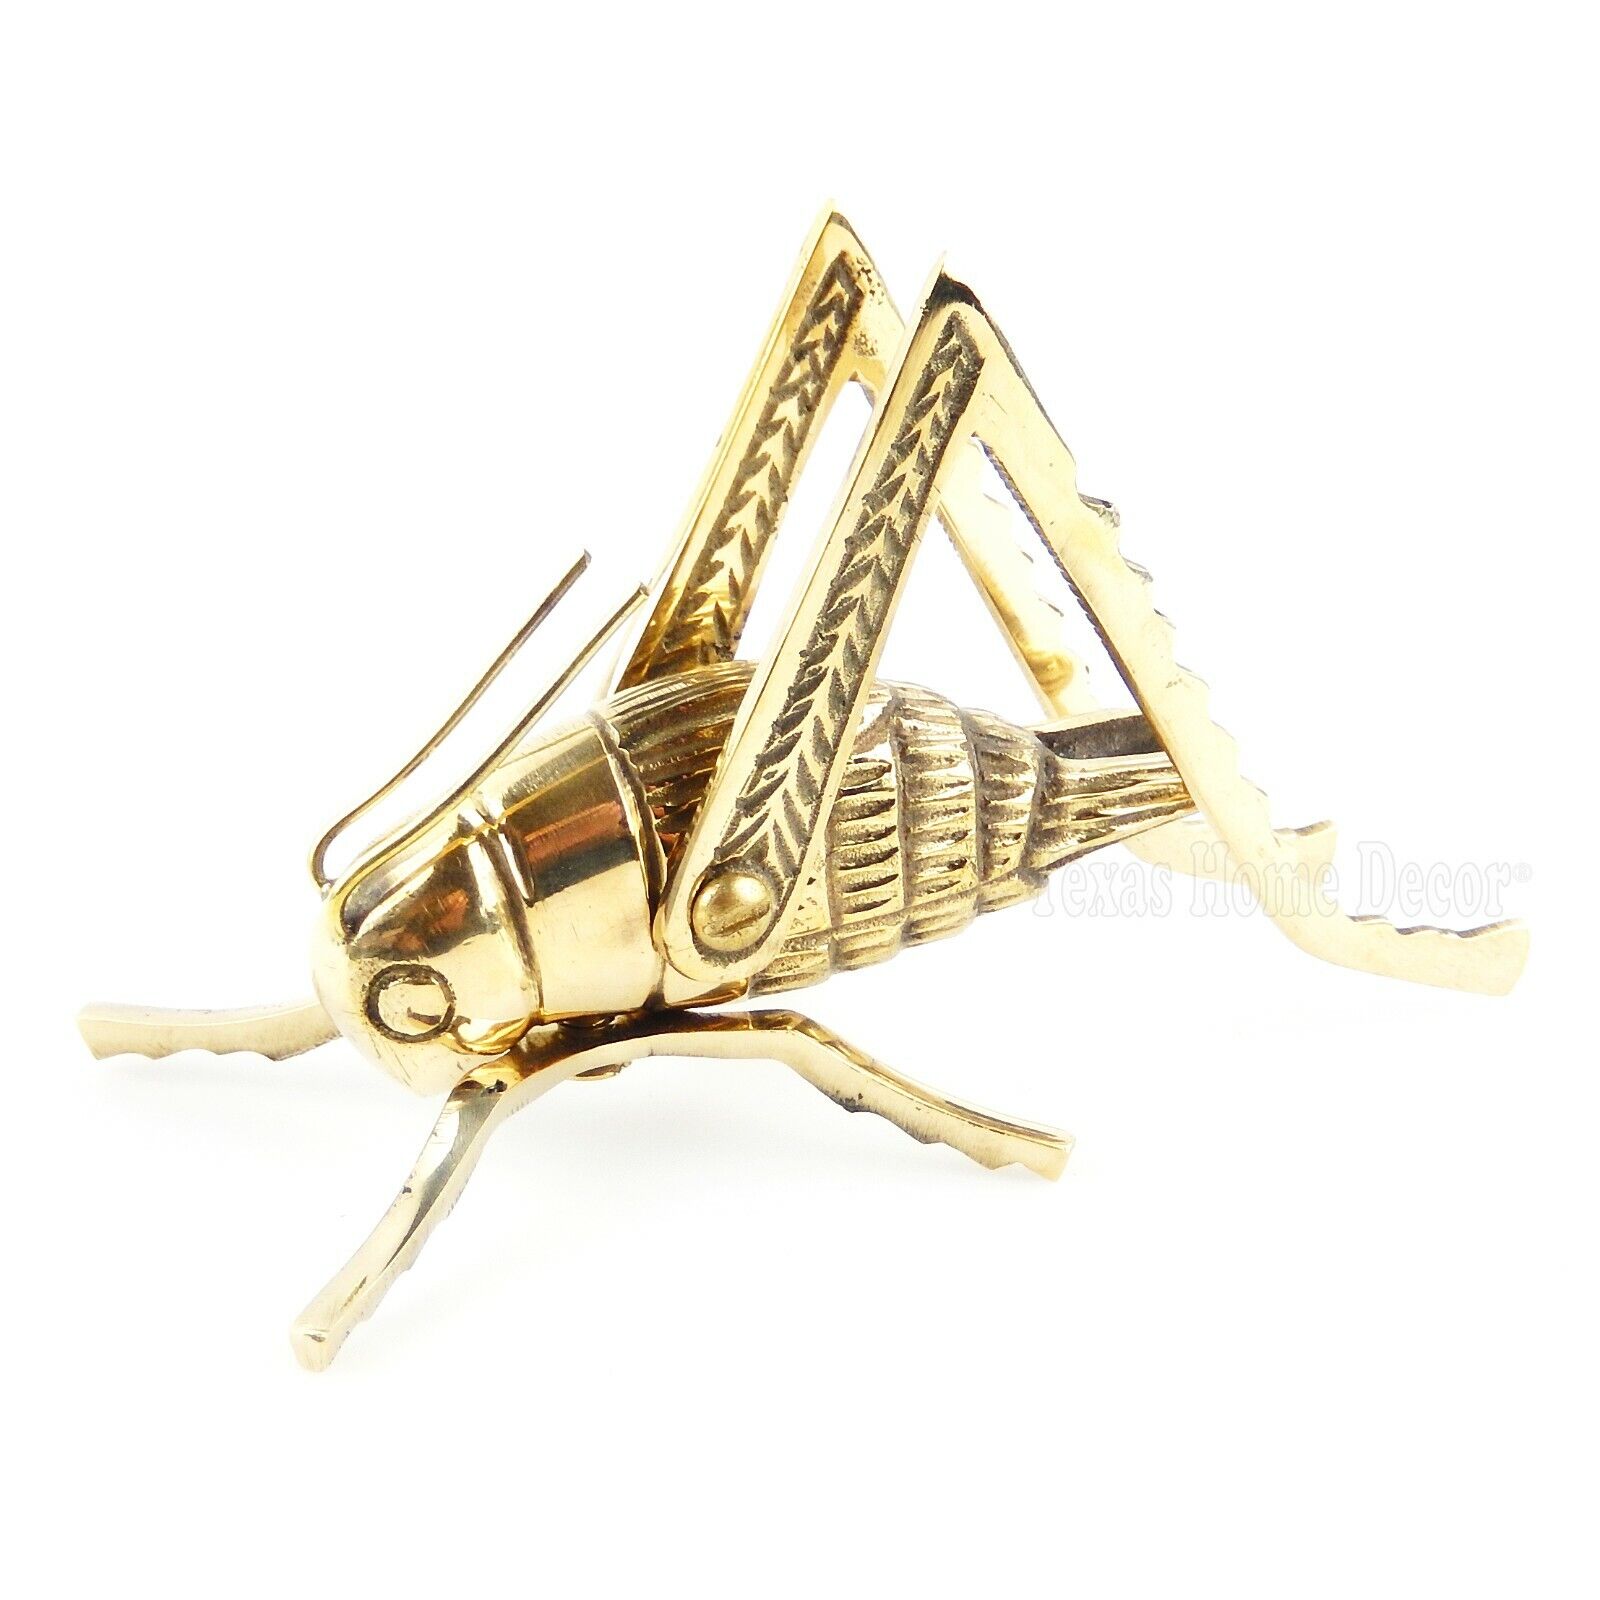 Hearth Cricket Fireplace Figurine Good Luck Health Solid Brass Insect Gold Color